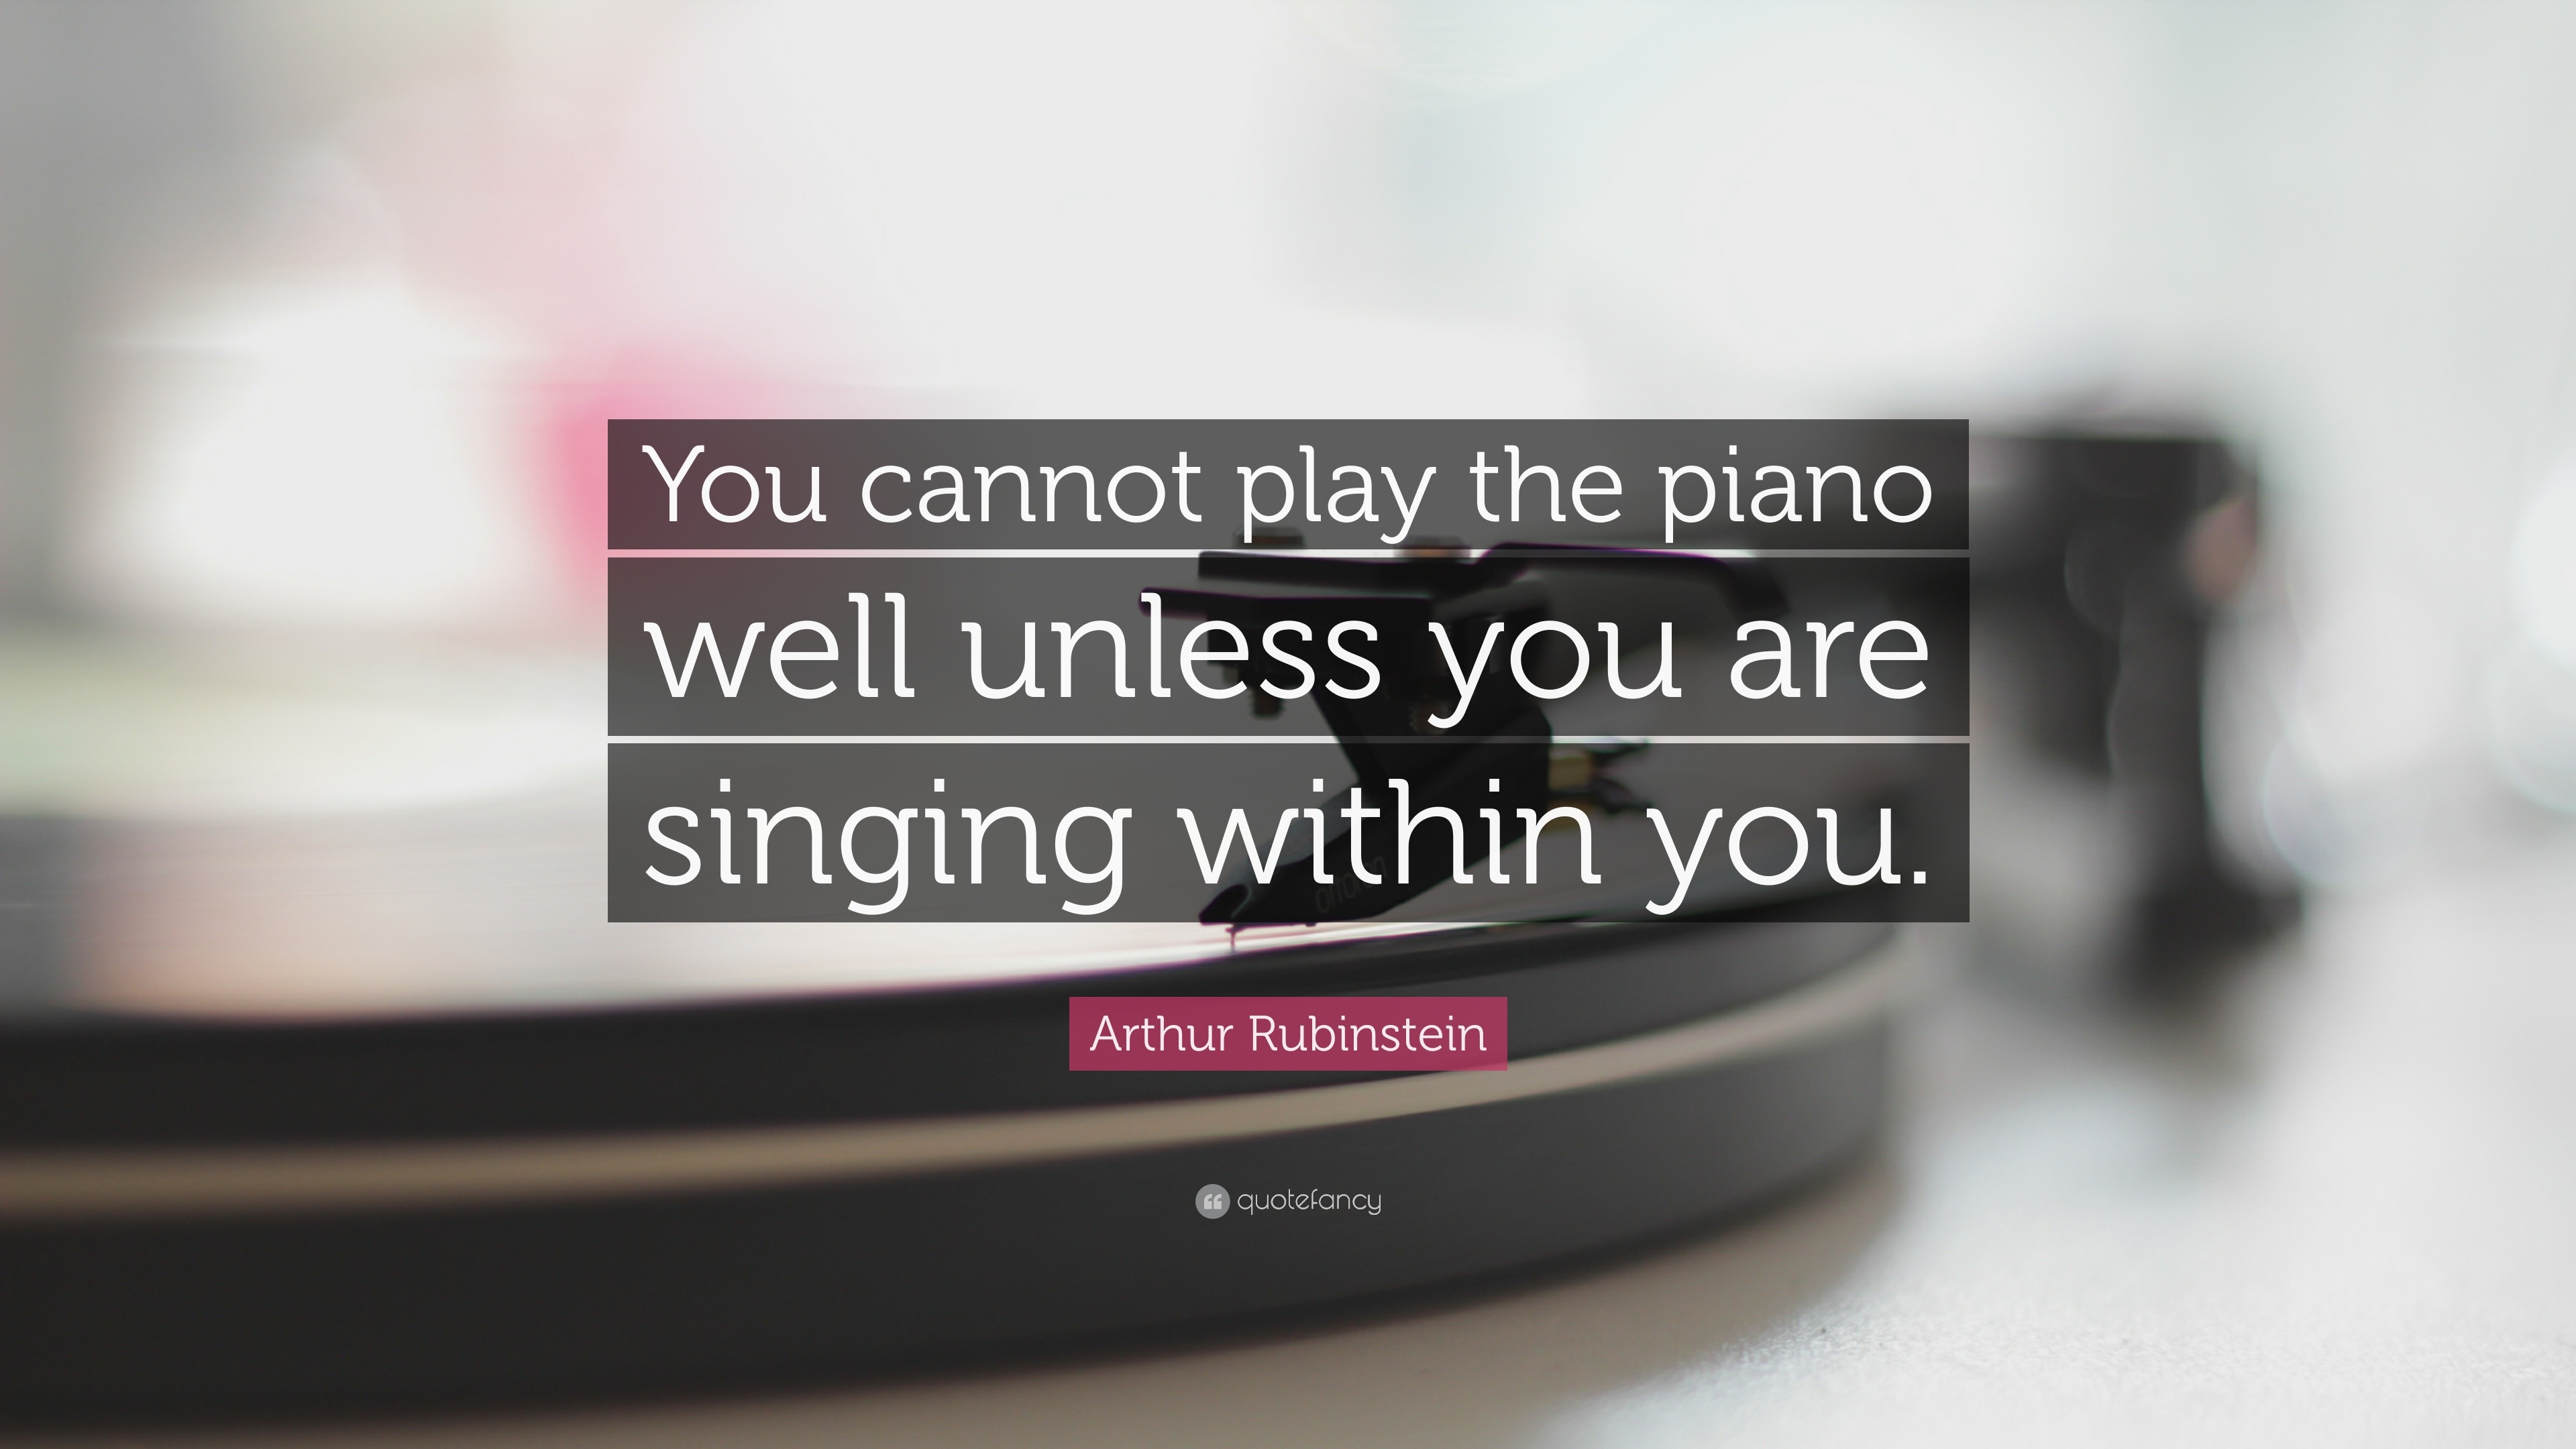 Arthur Rubinstein Quote “You cannot play the piano well unless you are singing within